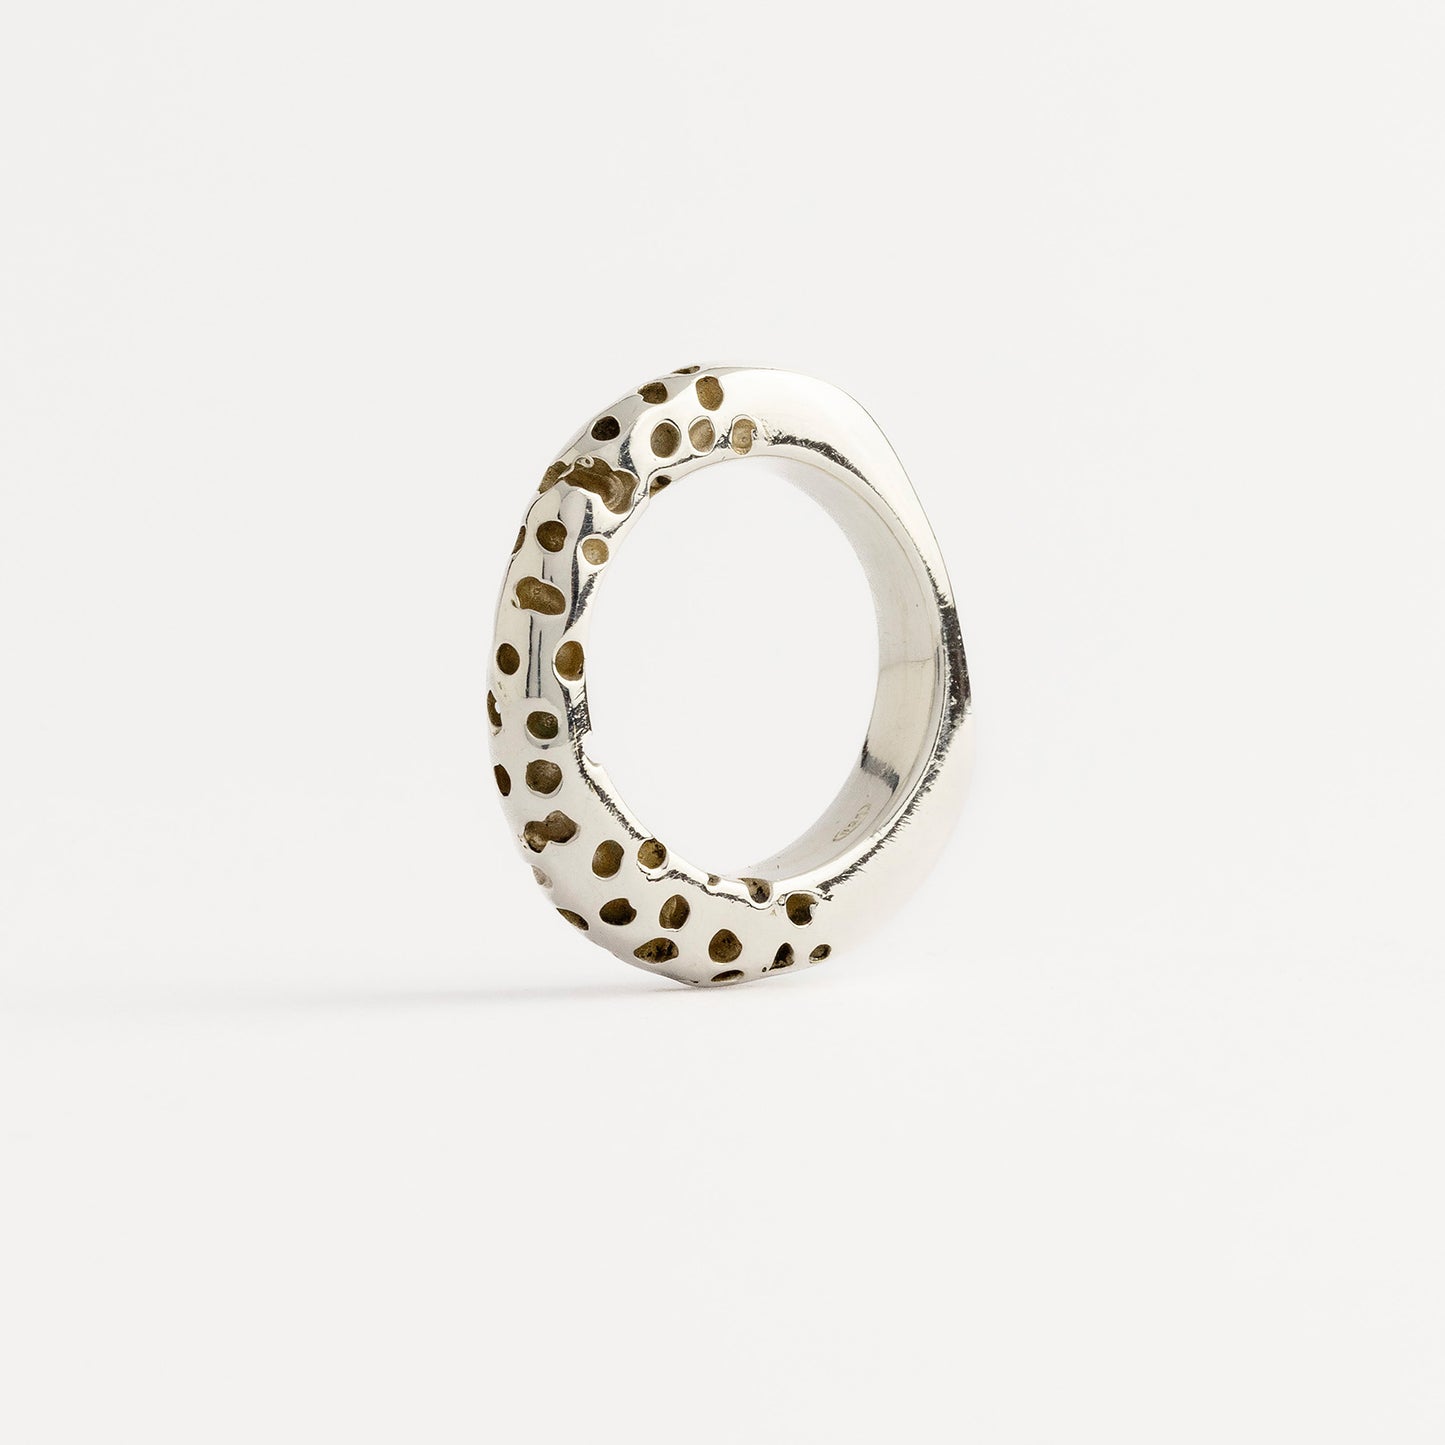 silver ring by ester studio photo by stefania meli